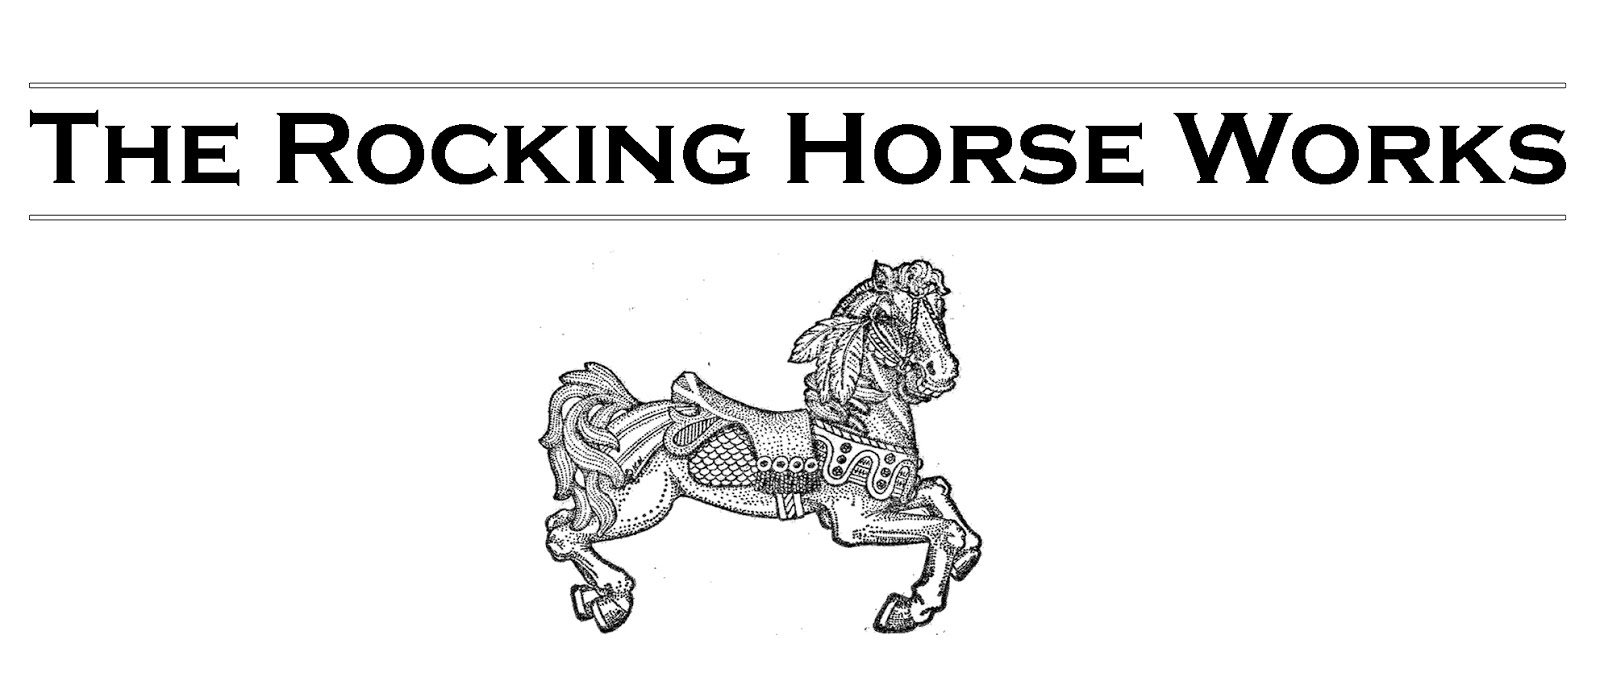 The Rocking Horse Works